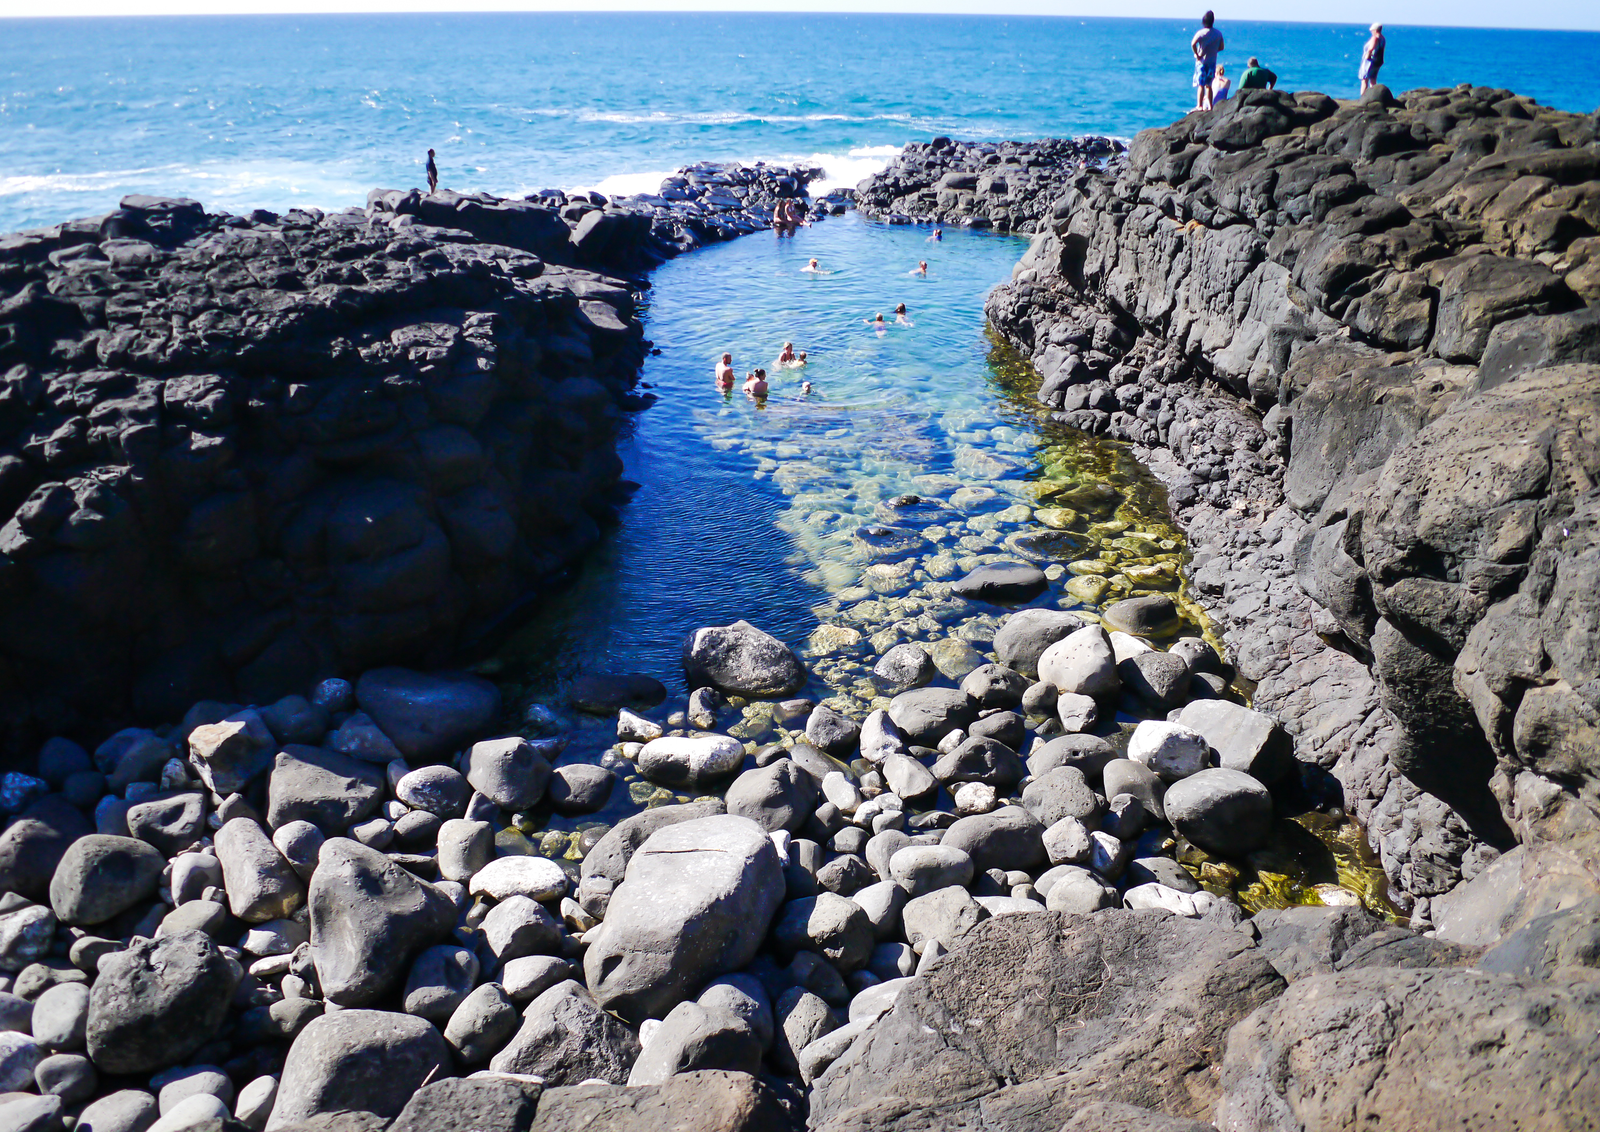 Tourists stand on rocks and bathing in a water reservoir at Queen's Bath, its rocky coast is one of the best snorkeling spots in Kauai